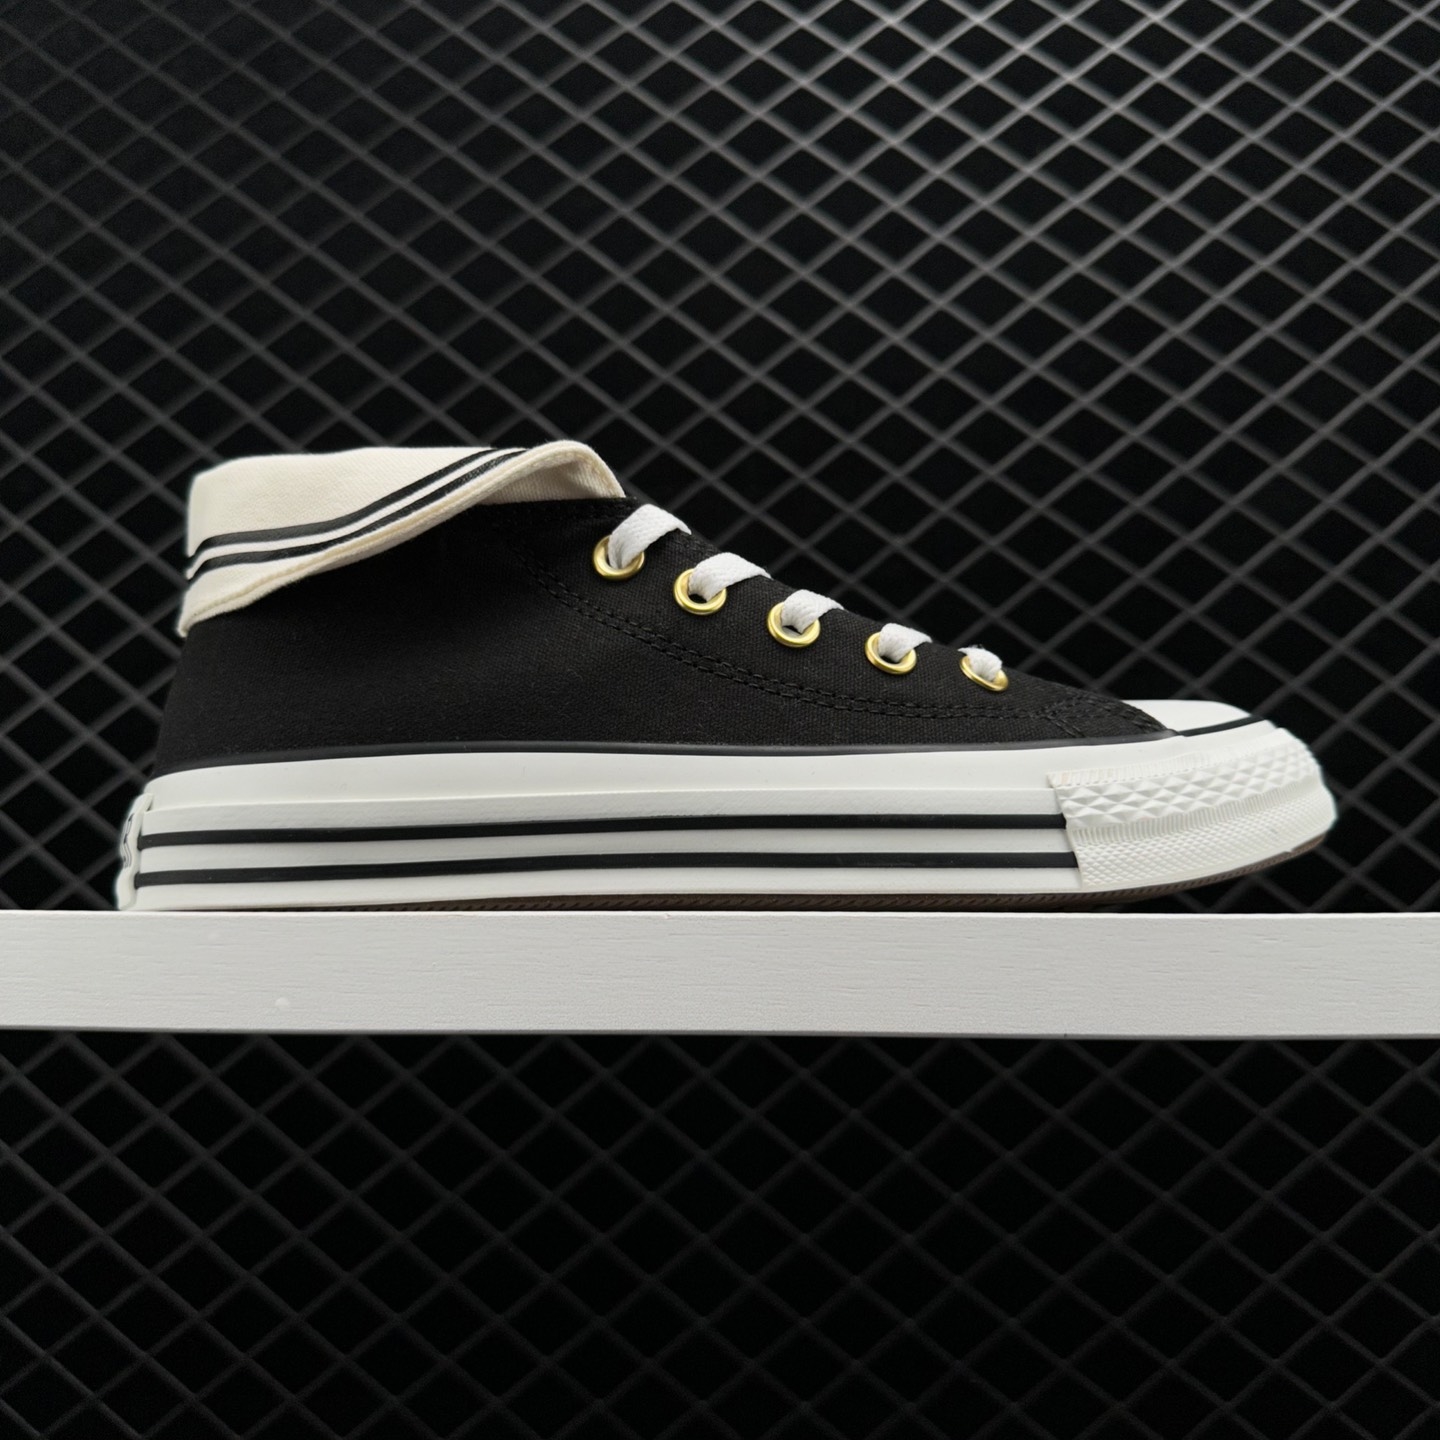 Converse All Star Sw Ox Sailor Suit Mid Canvas Shoes Black - Stylish and Versatile Footwear